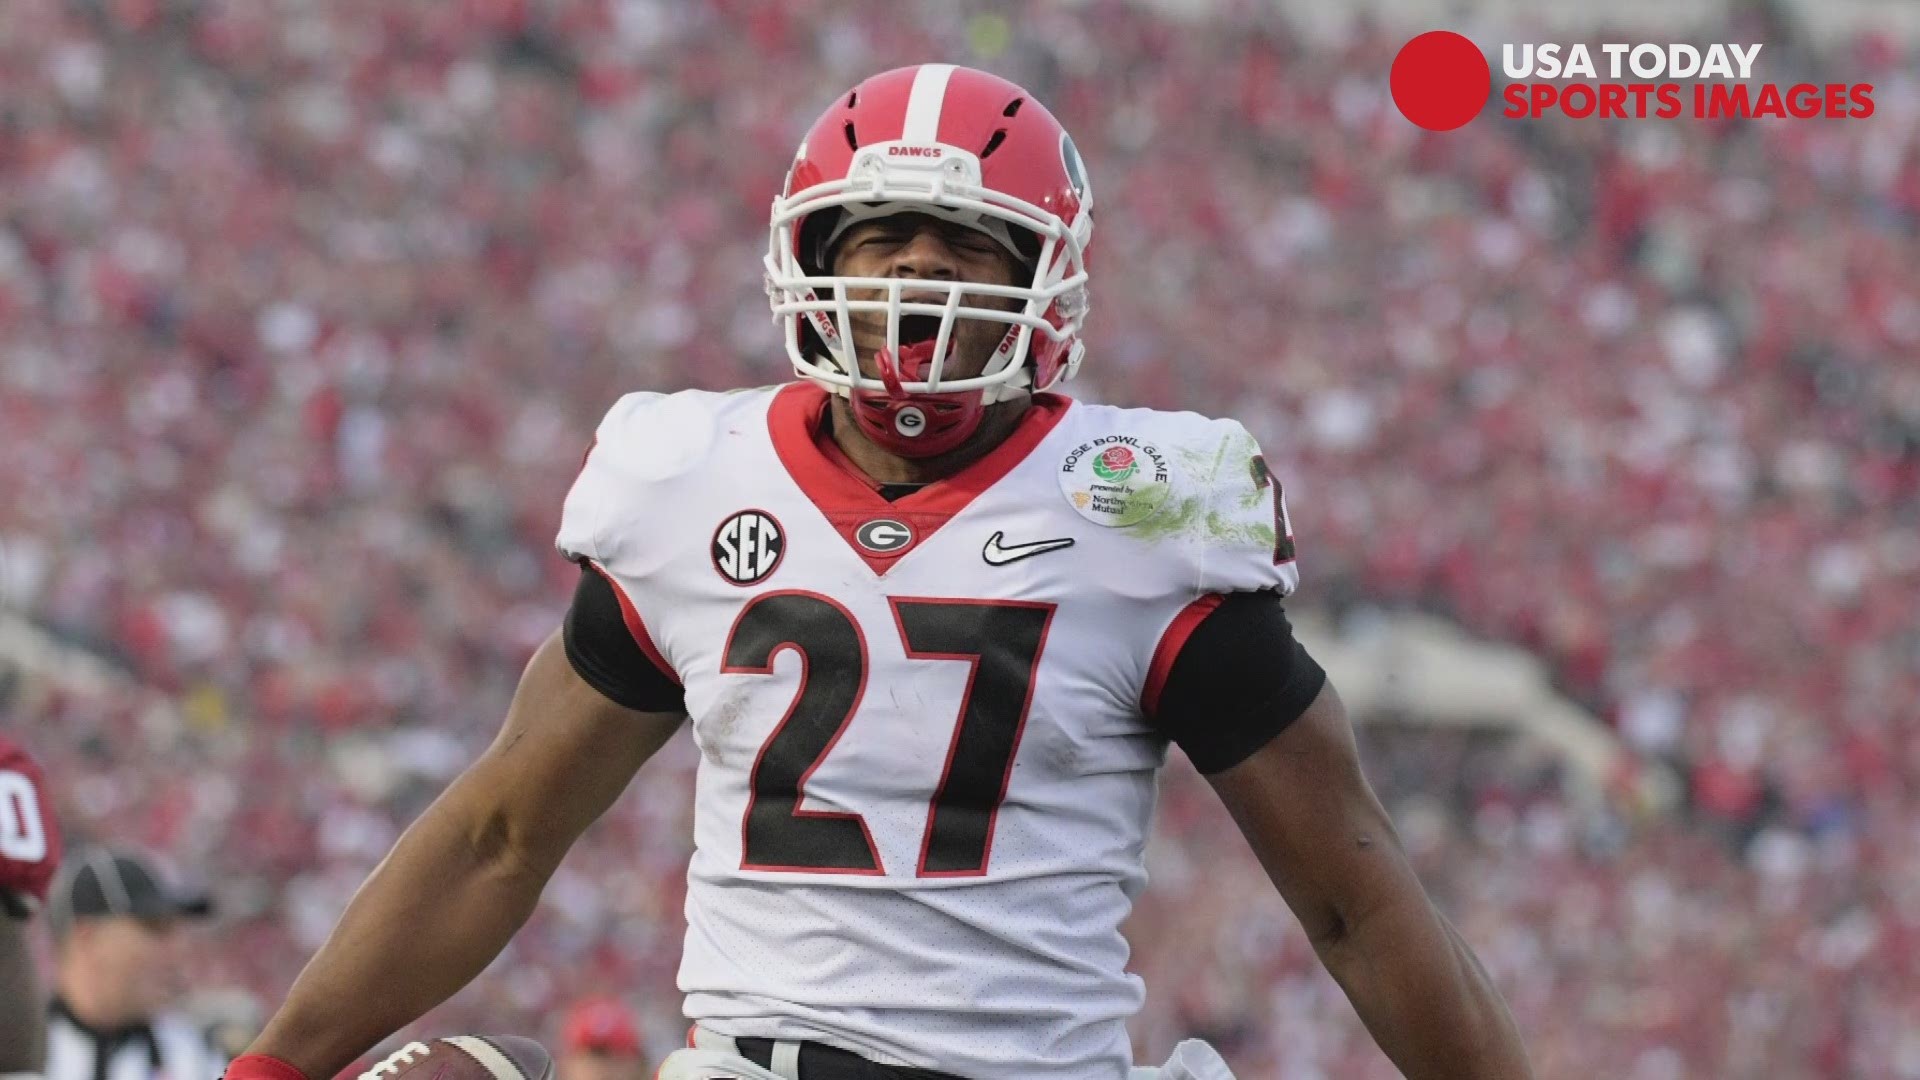 Cleveland Browns Coach Hue Jackson believes former Georgia RB Nick Chubb is a perfect fit in the AFC North Division.